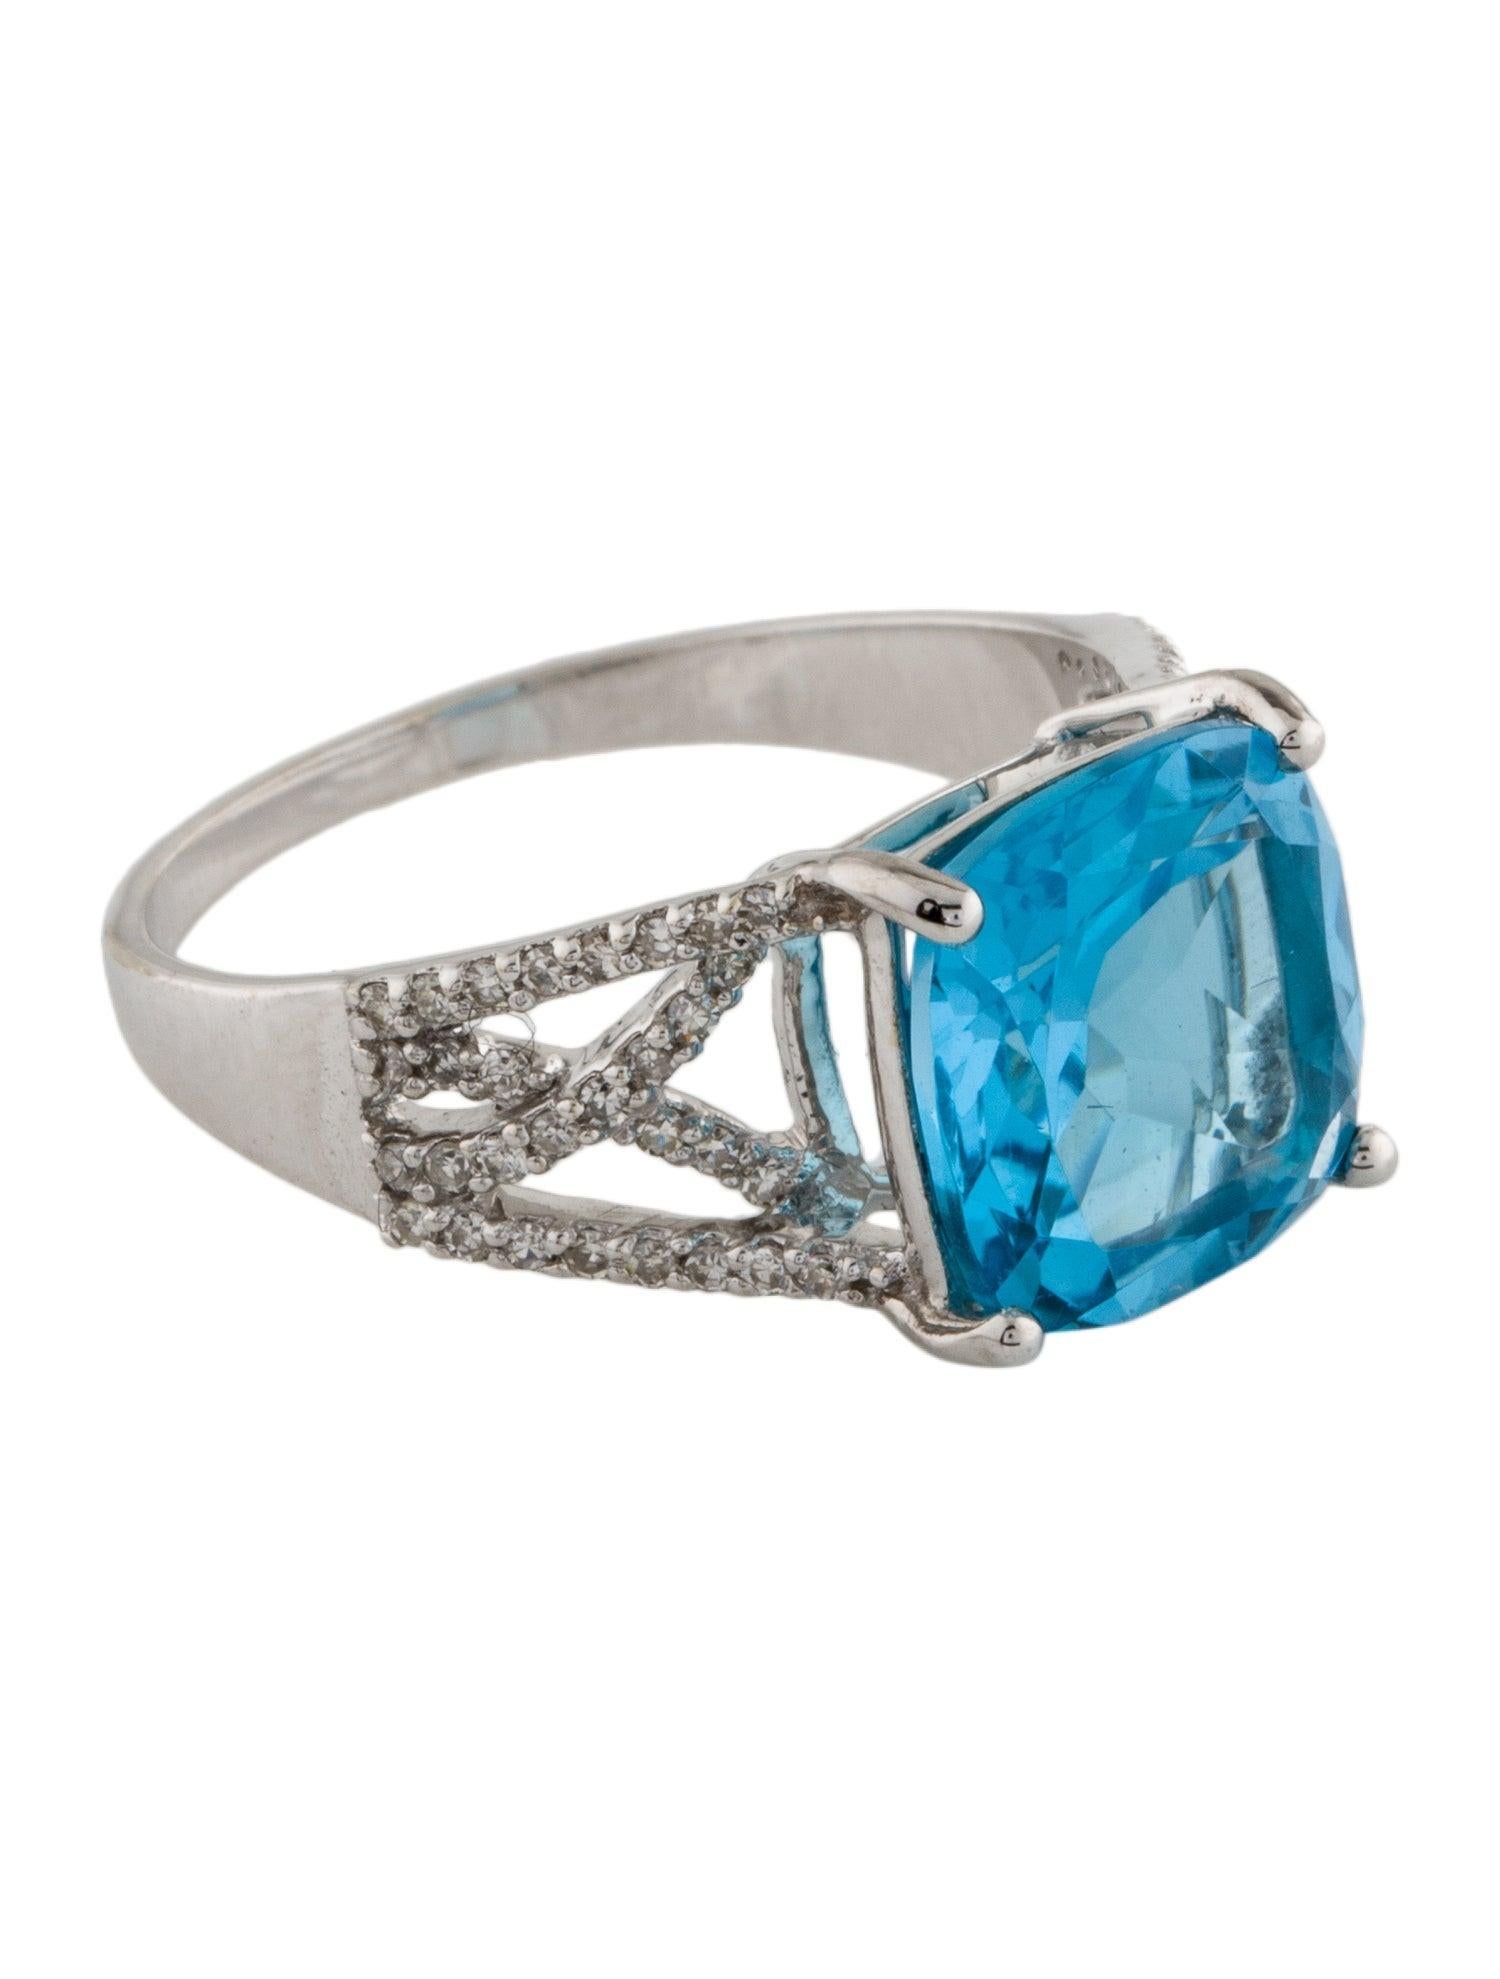 Indulge in the celestial allure of our Celestial Azure collection with this breathtaking Swiss Blue Topaz and Diamond ring from Jeweltique. Immerse yourself in the wonder of deep blue hues reminiscent of the vast, star-studded night sky, beautifully